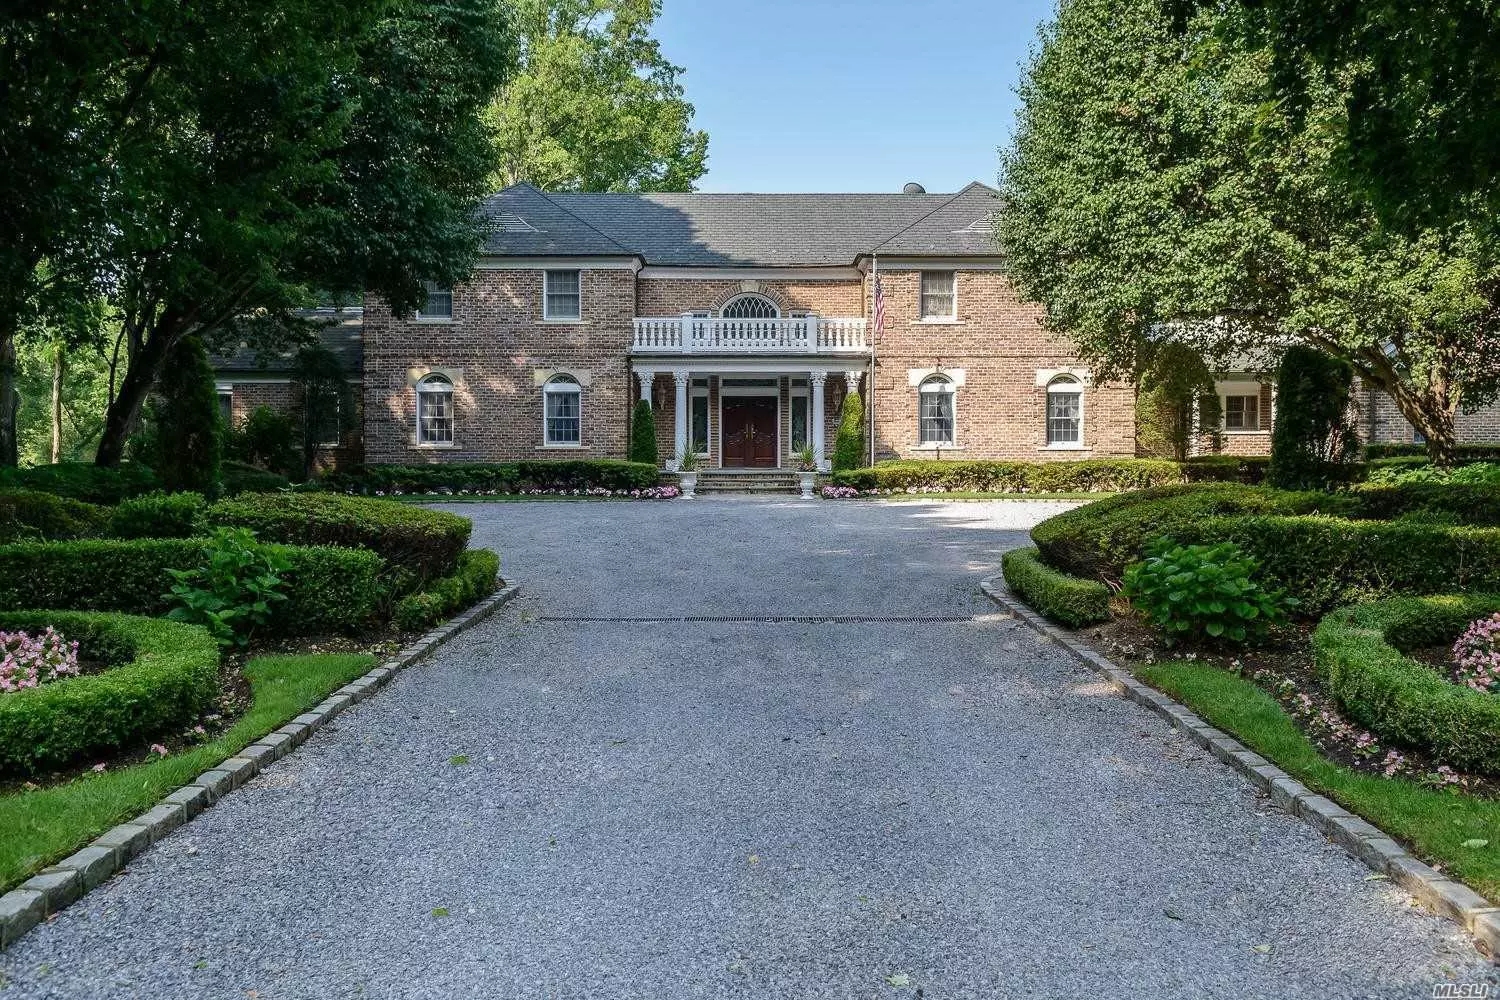 Magnificent Estate Located On 10+/- Acres With Rolling Lawns, Mature Trees And Professional Landscaping. Very Private. Beautiful Pool And Surround. Wonderful Flowing Pond. A quiet Refuge From The World For Birds. animals & humans. Taxes Being Grieved. Generator.